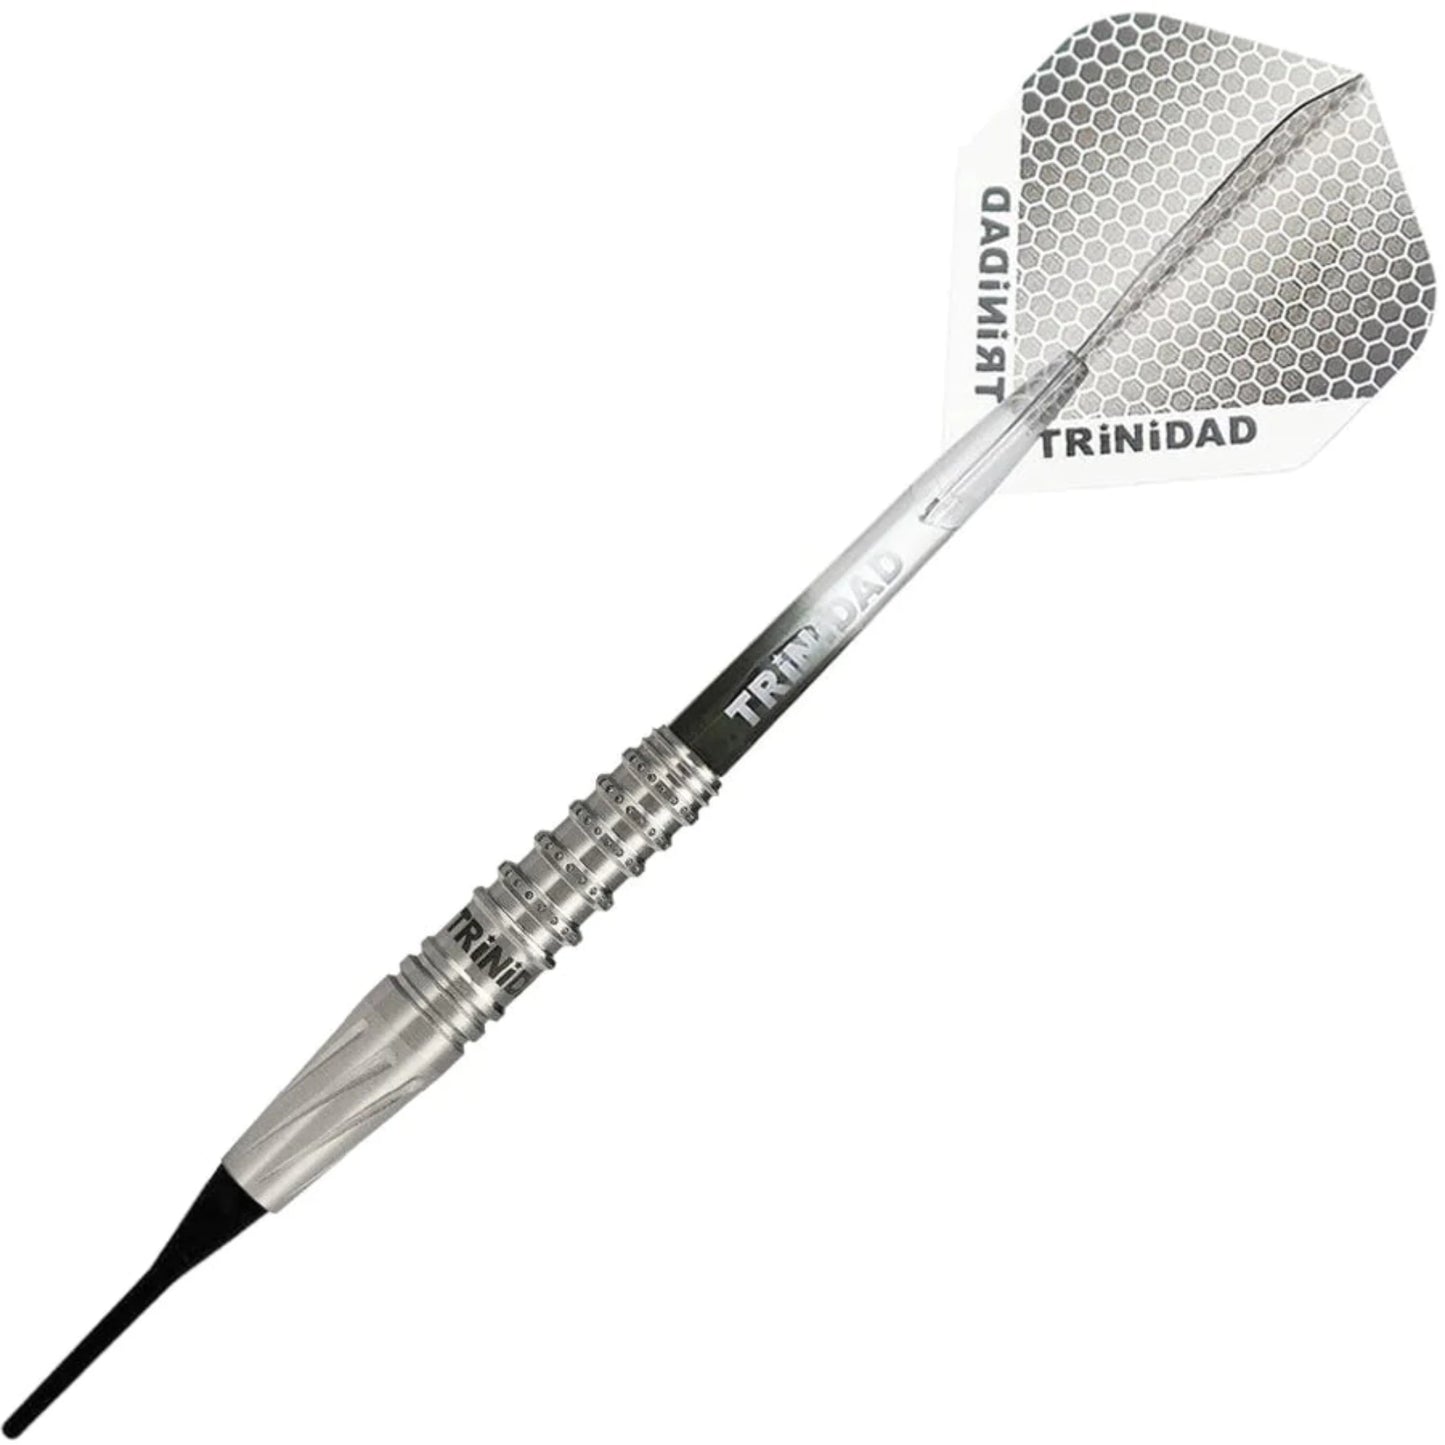 A single dart from the Trinidad Pro Series Ivan Type 2 set. The dart features a black tip, silver knurled barrel, and ombre black to clear acrylic shaft. The flight is mainly silver with white hexagon patterning. The brand name, Trinidad, is featured on the grip, shaft, and flight.